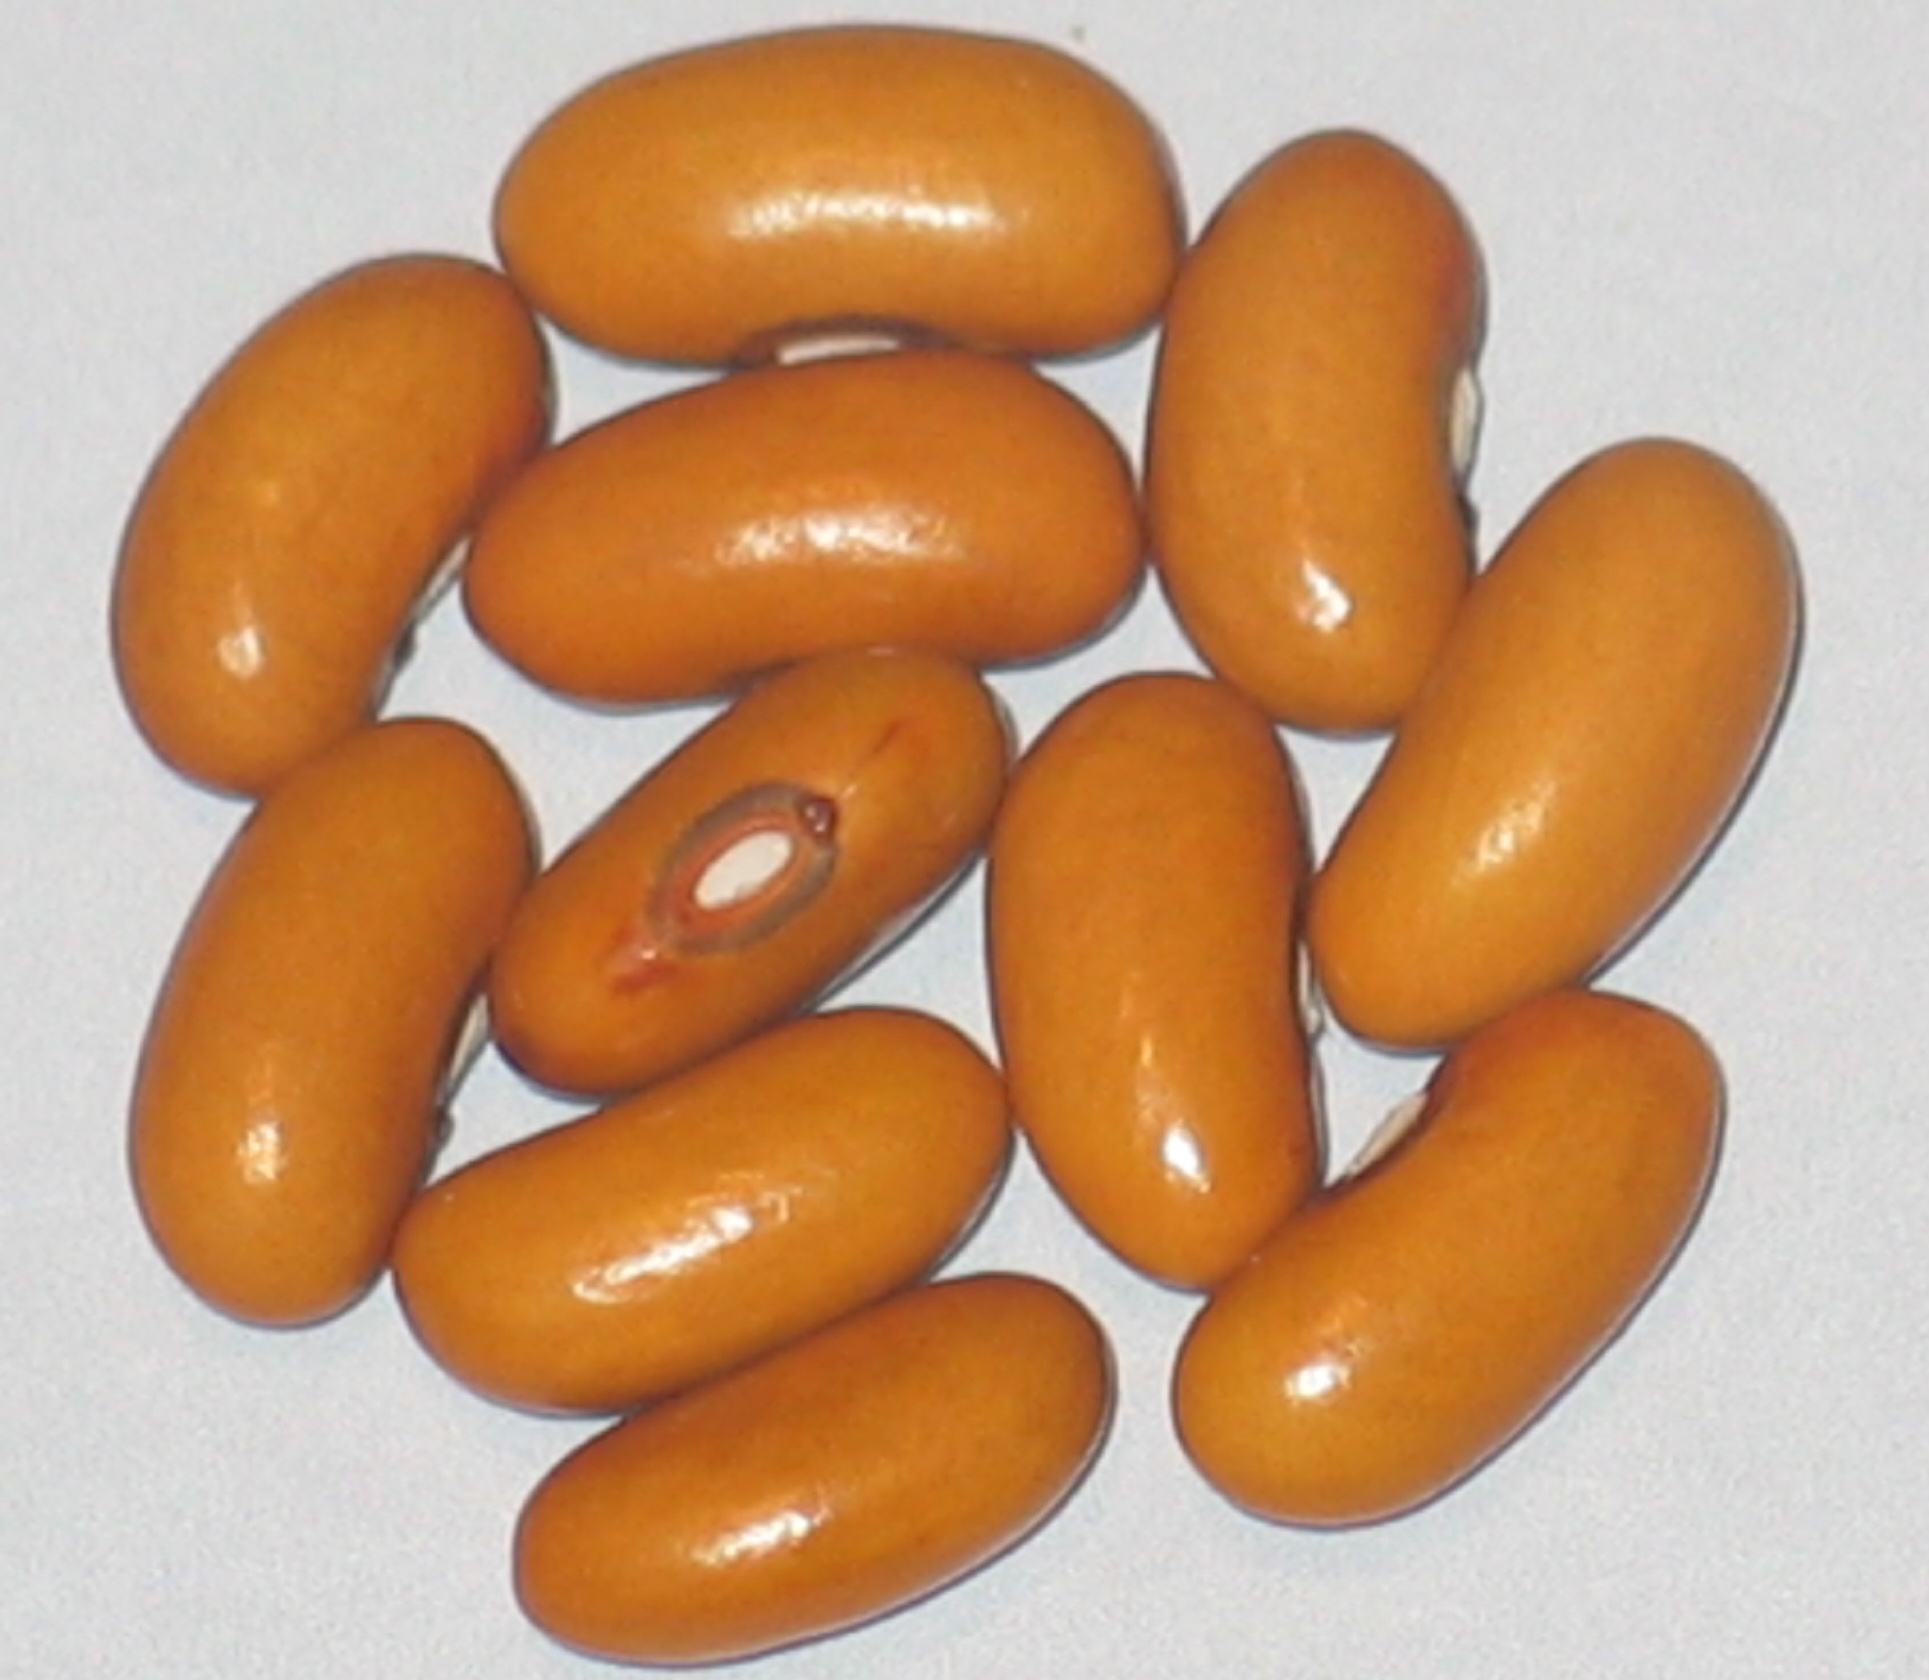 image of Unrivalled Wax beans